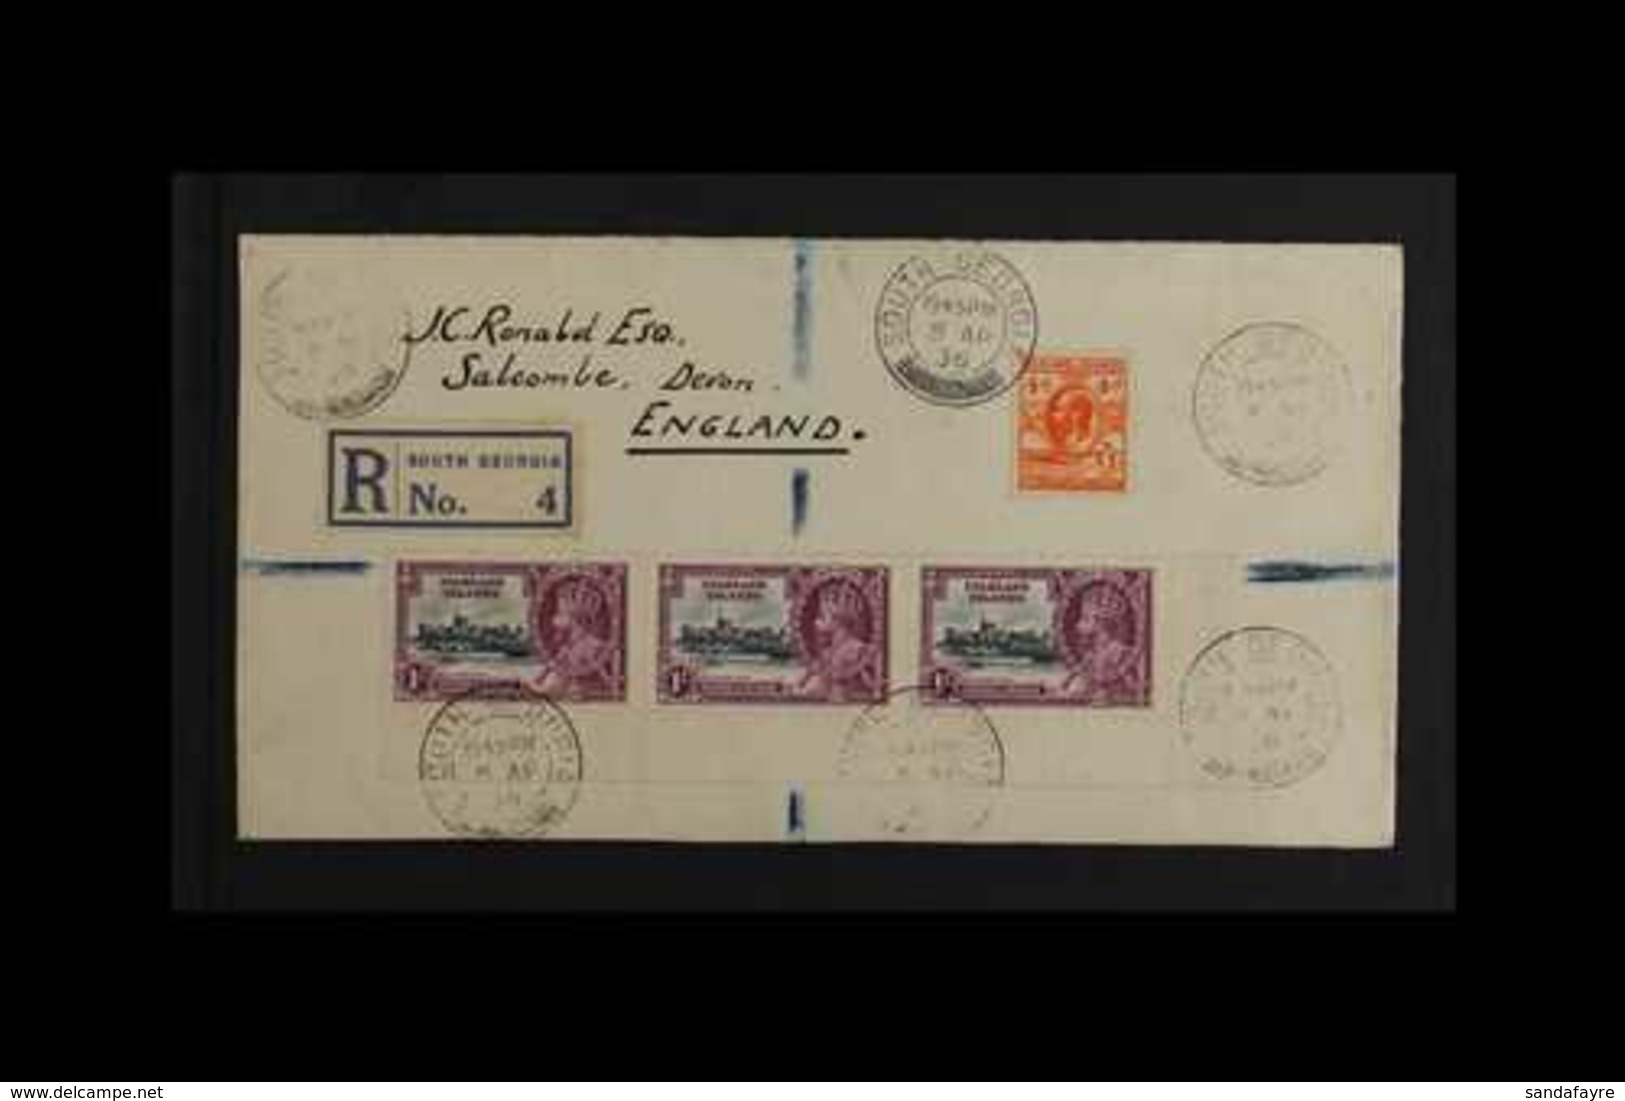 1936 SOUTH GEORGIA COVER  An Attractive, Registered Cover To Devon, England Bearing Falkland Islands 1935 1s Silver Jubi - Falklandinseln